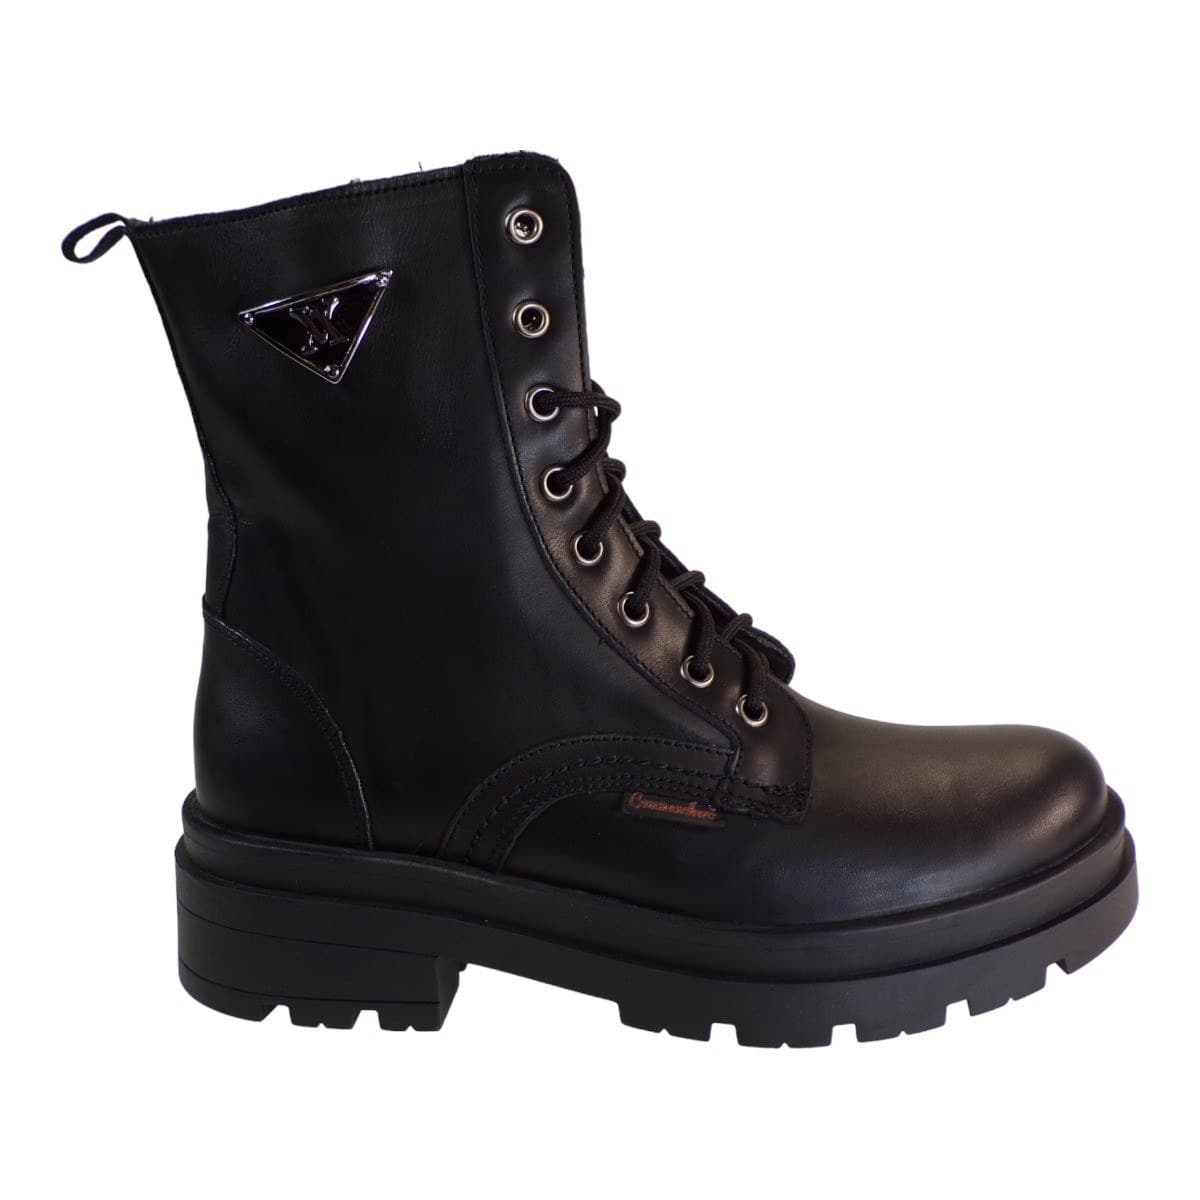 LEATHER ARMY BOOTS 5797-721 COMMANCHERO BLACK